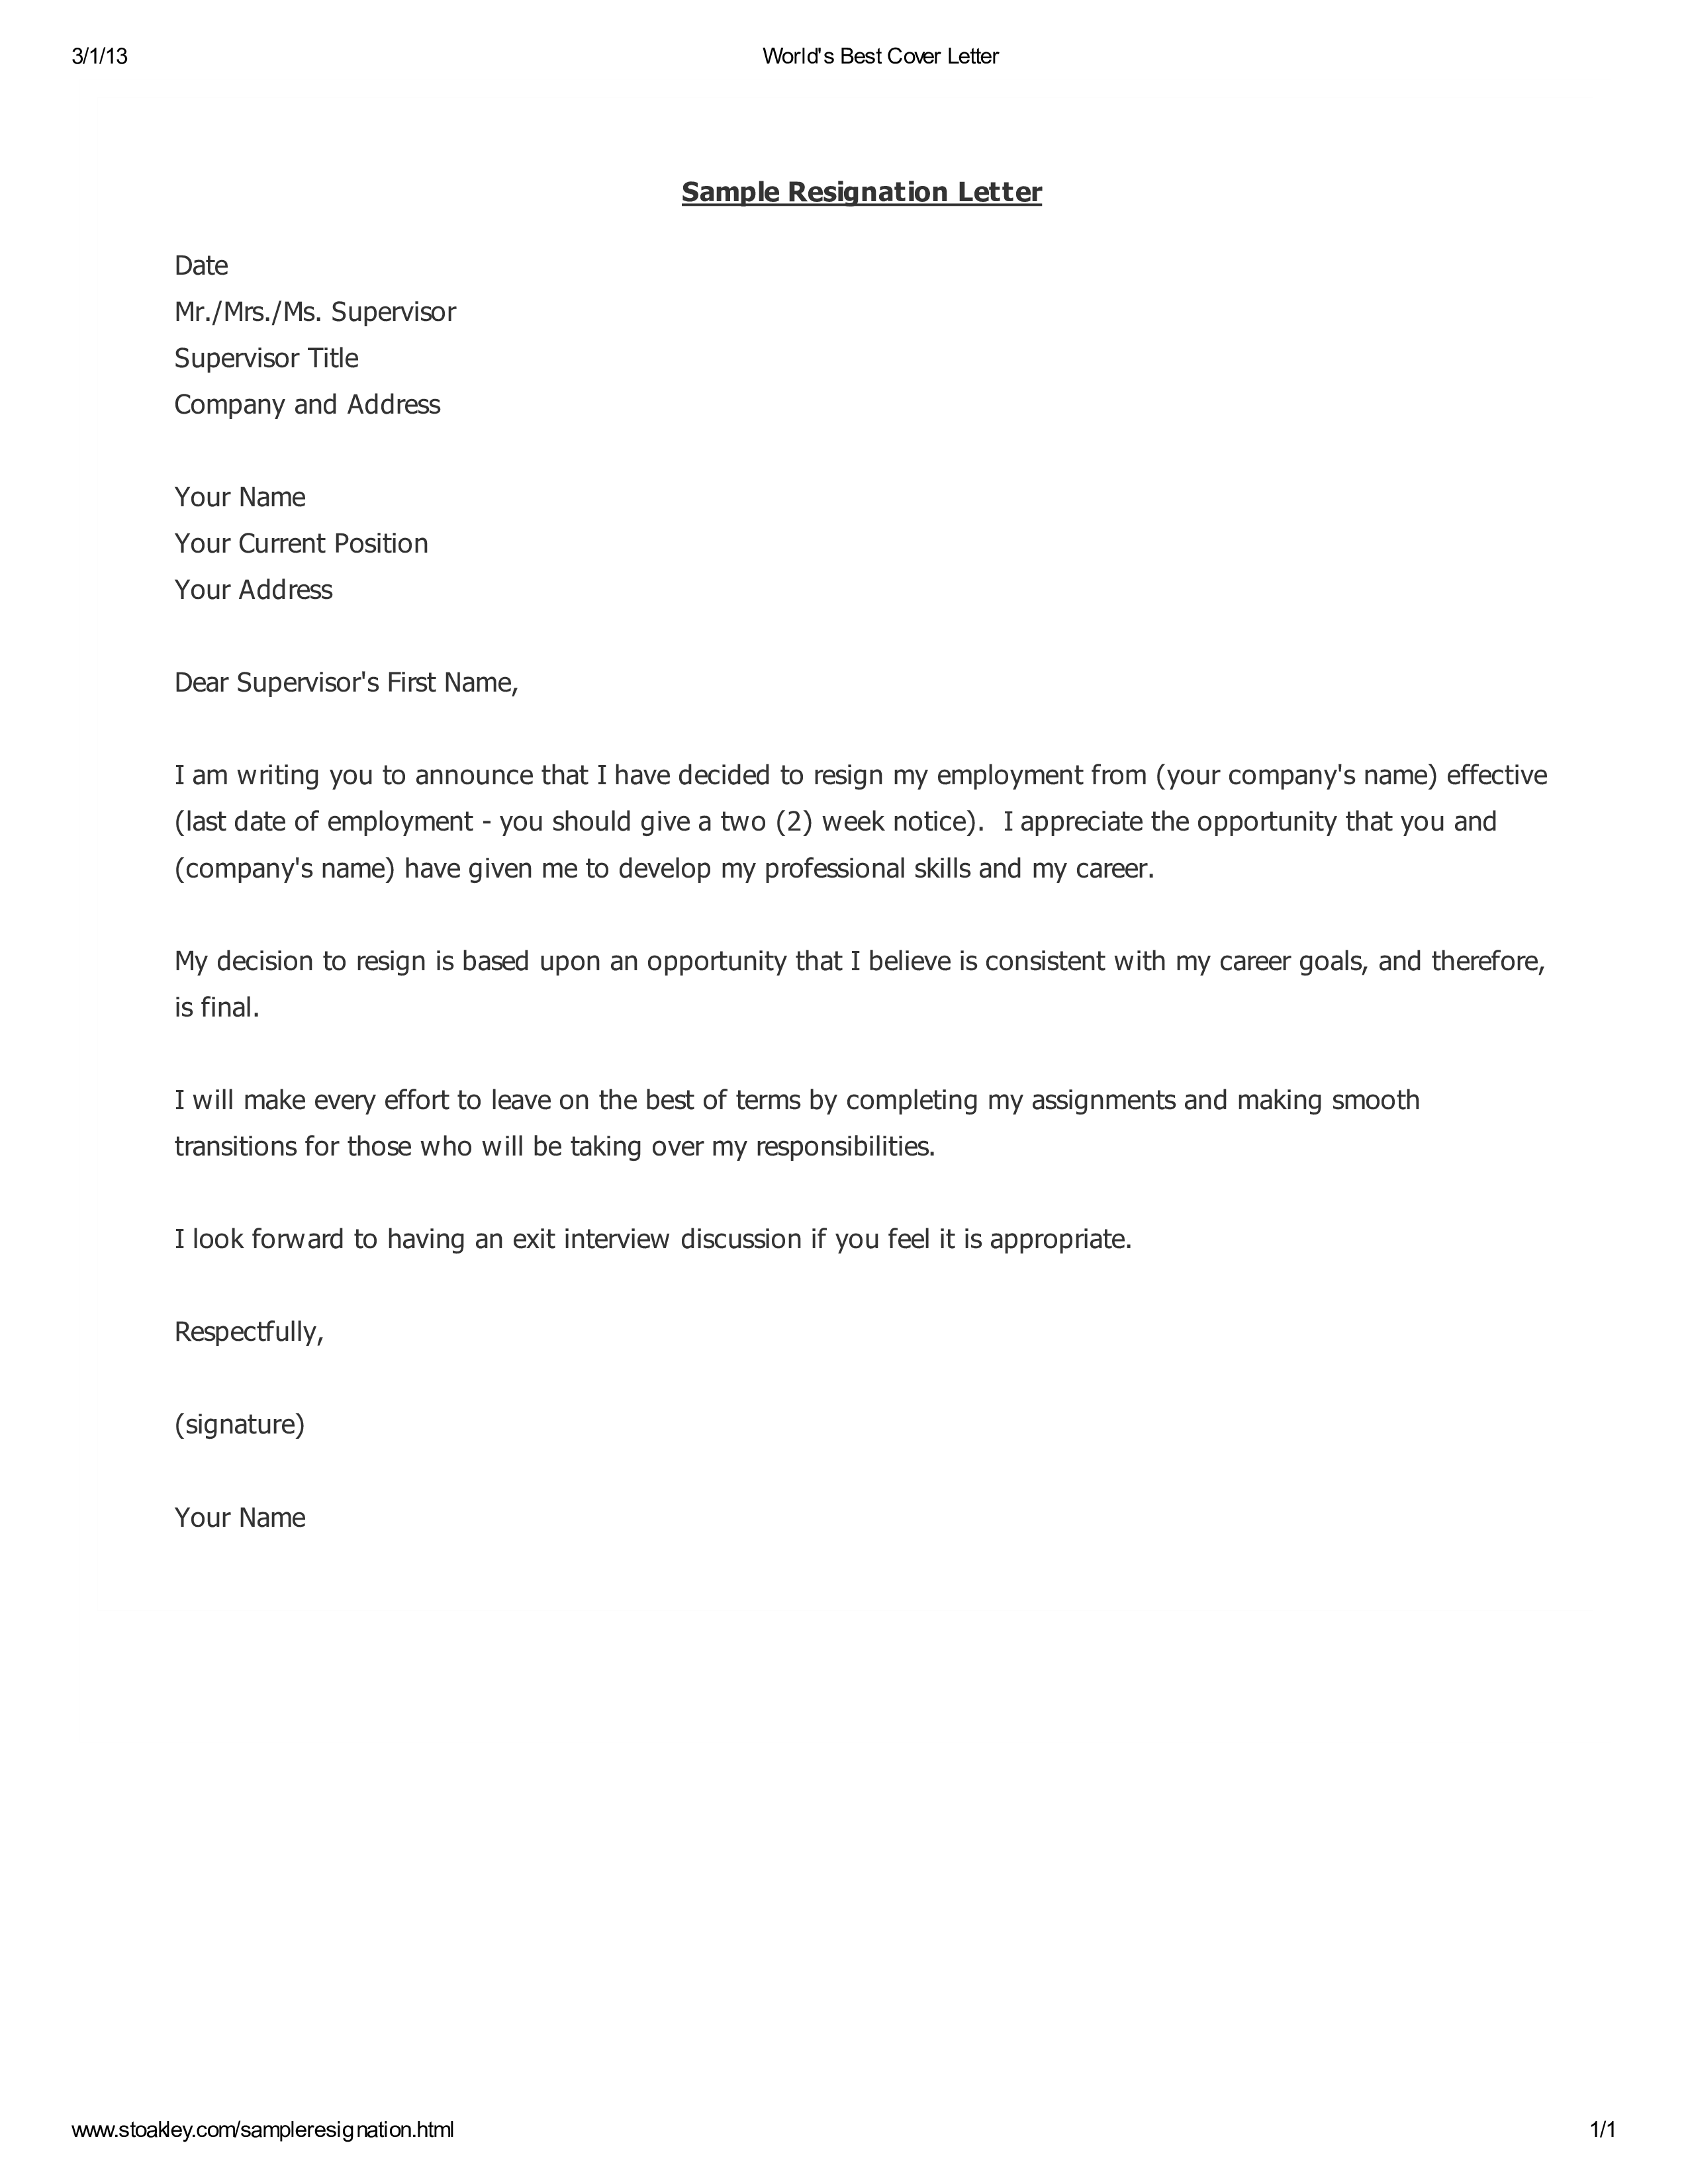 Formal Resignation Letter In Format Templates at